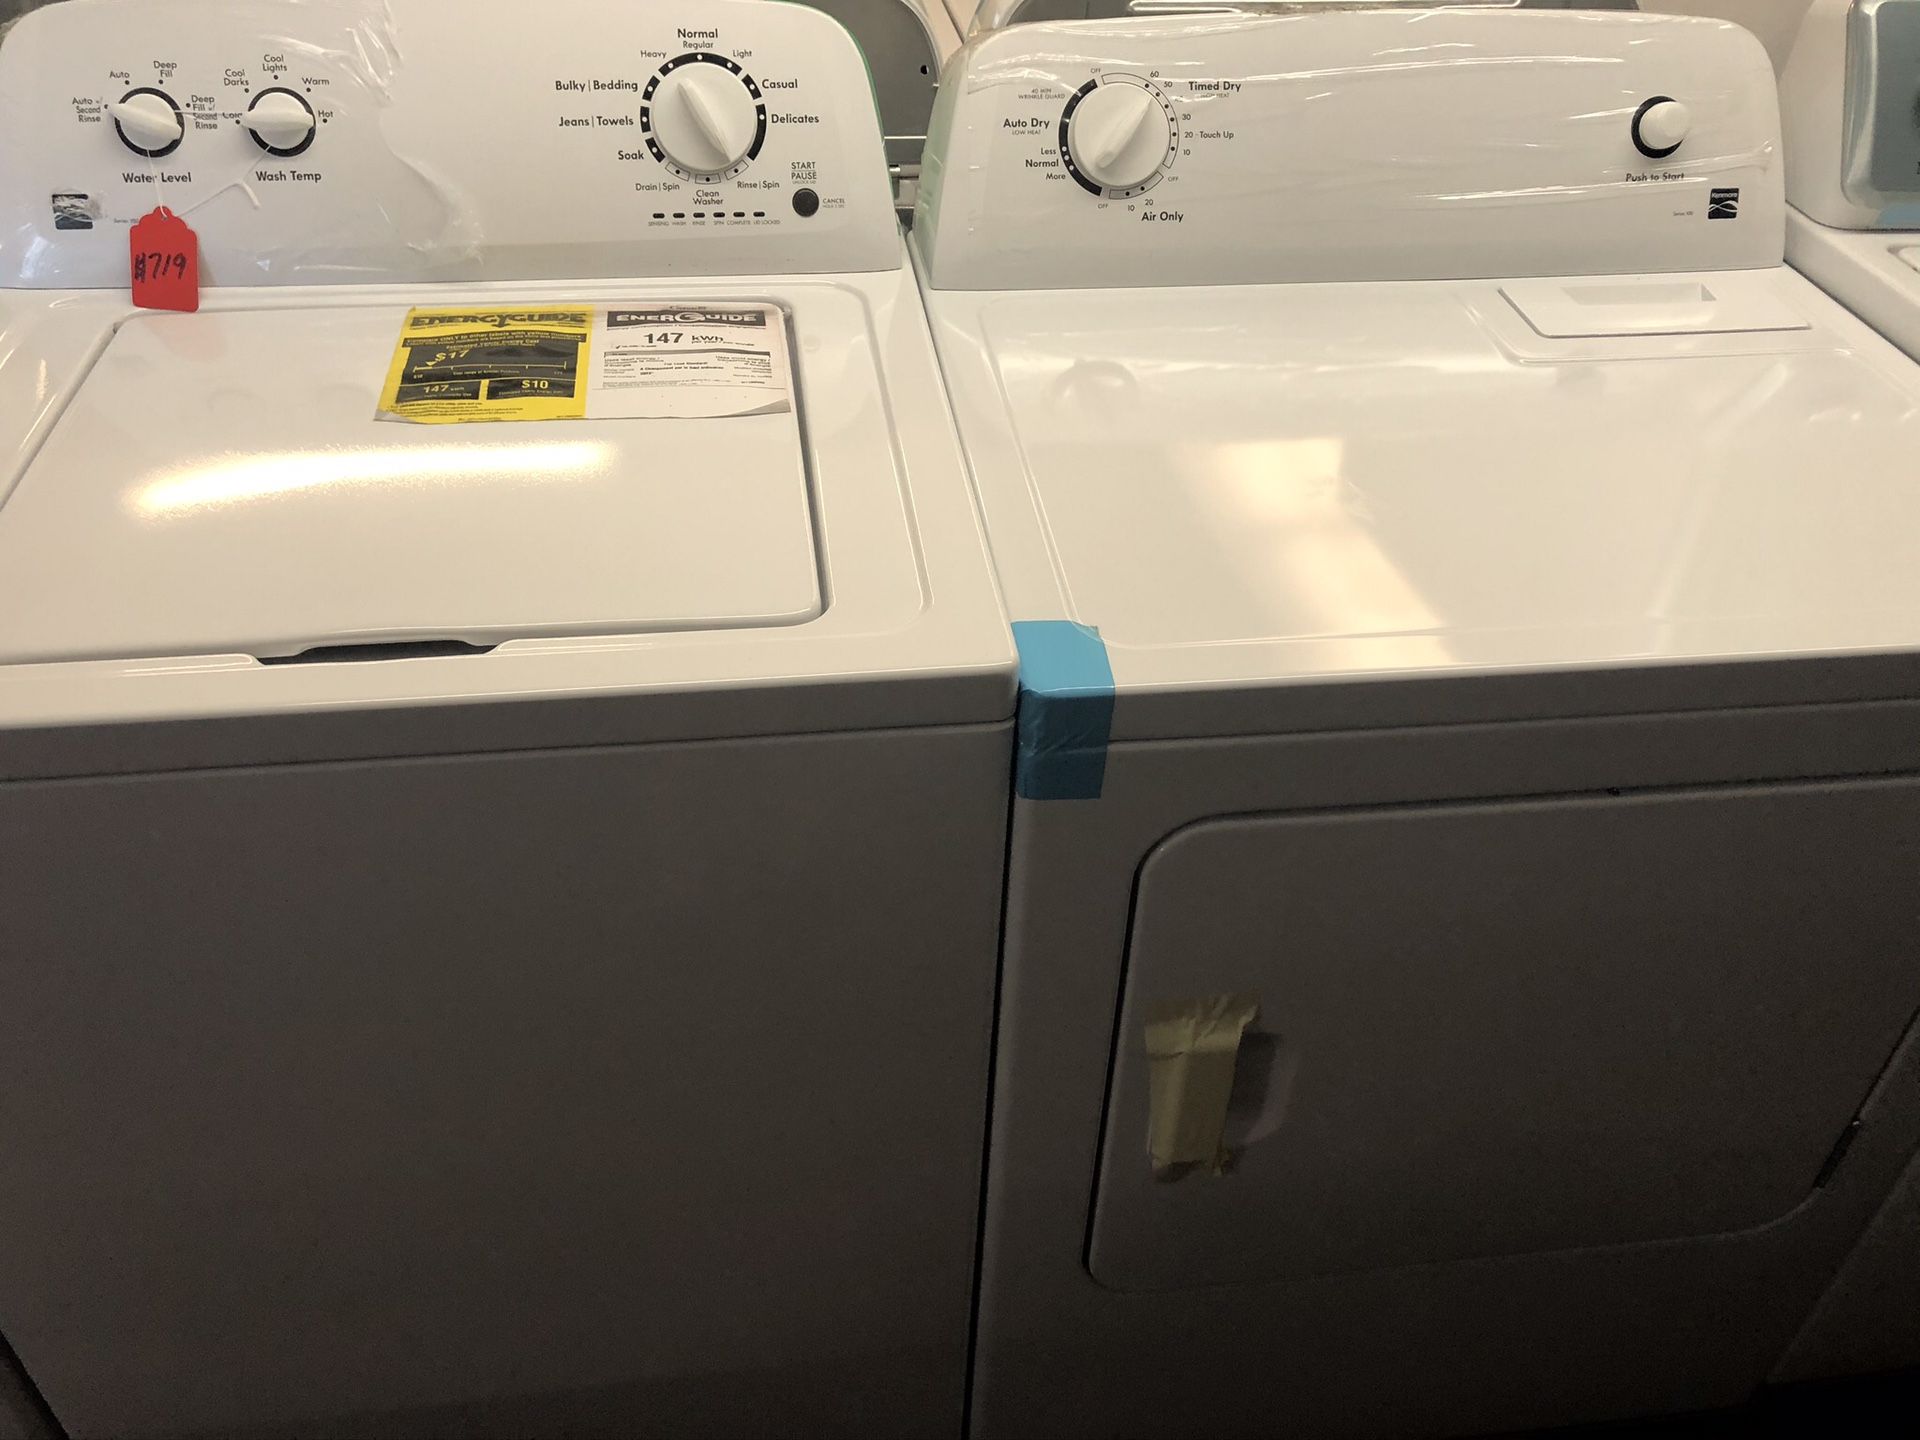 New scratch and dent kenmore washer and dryer set. 1 year warranty